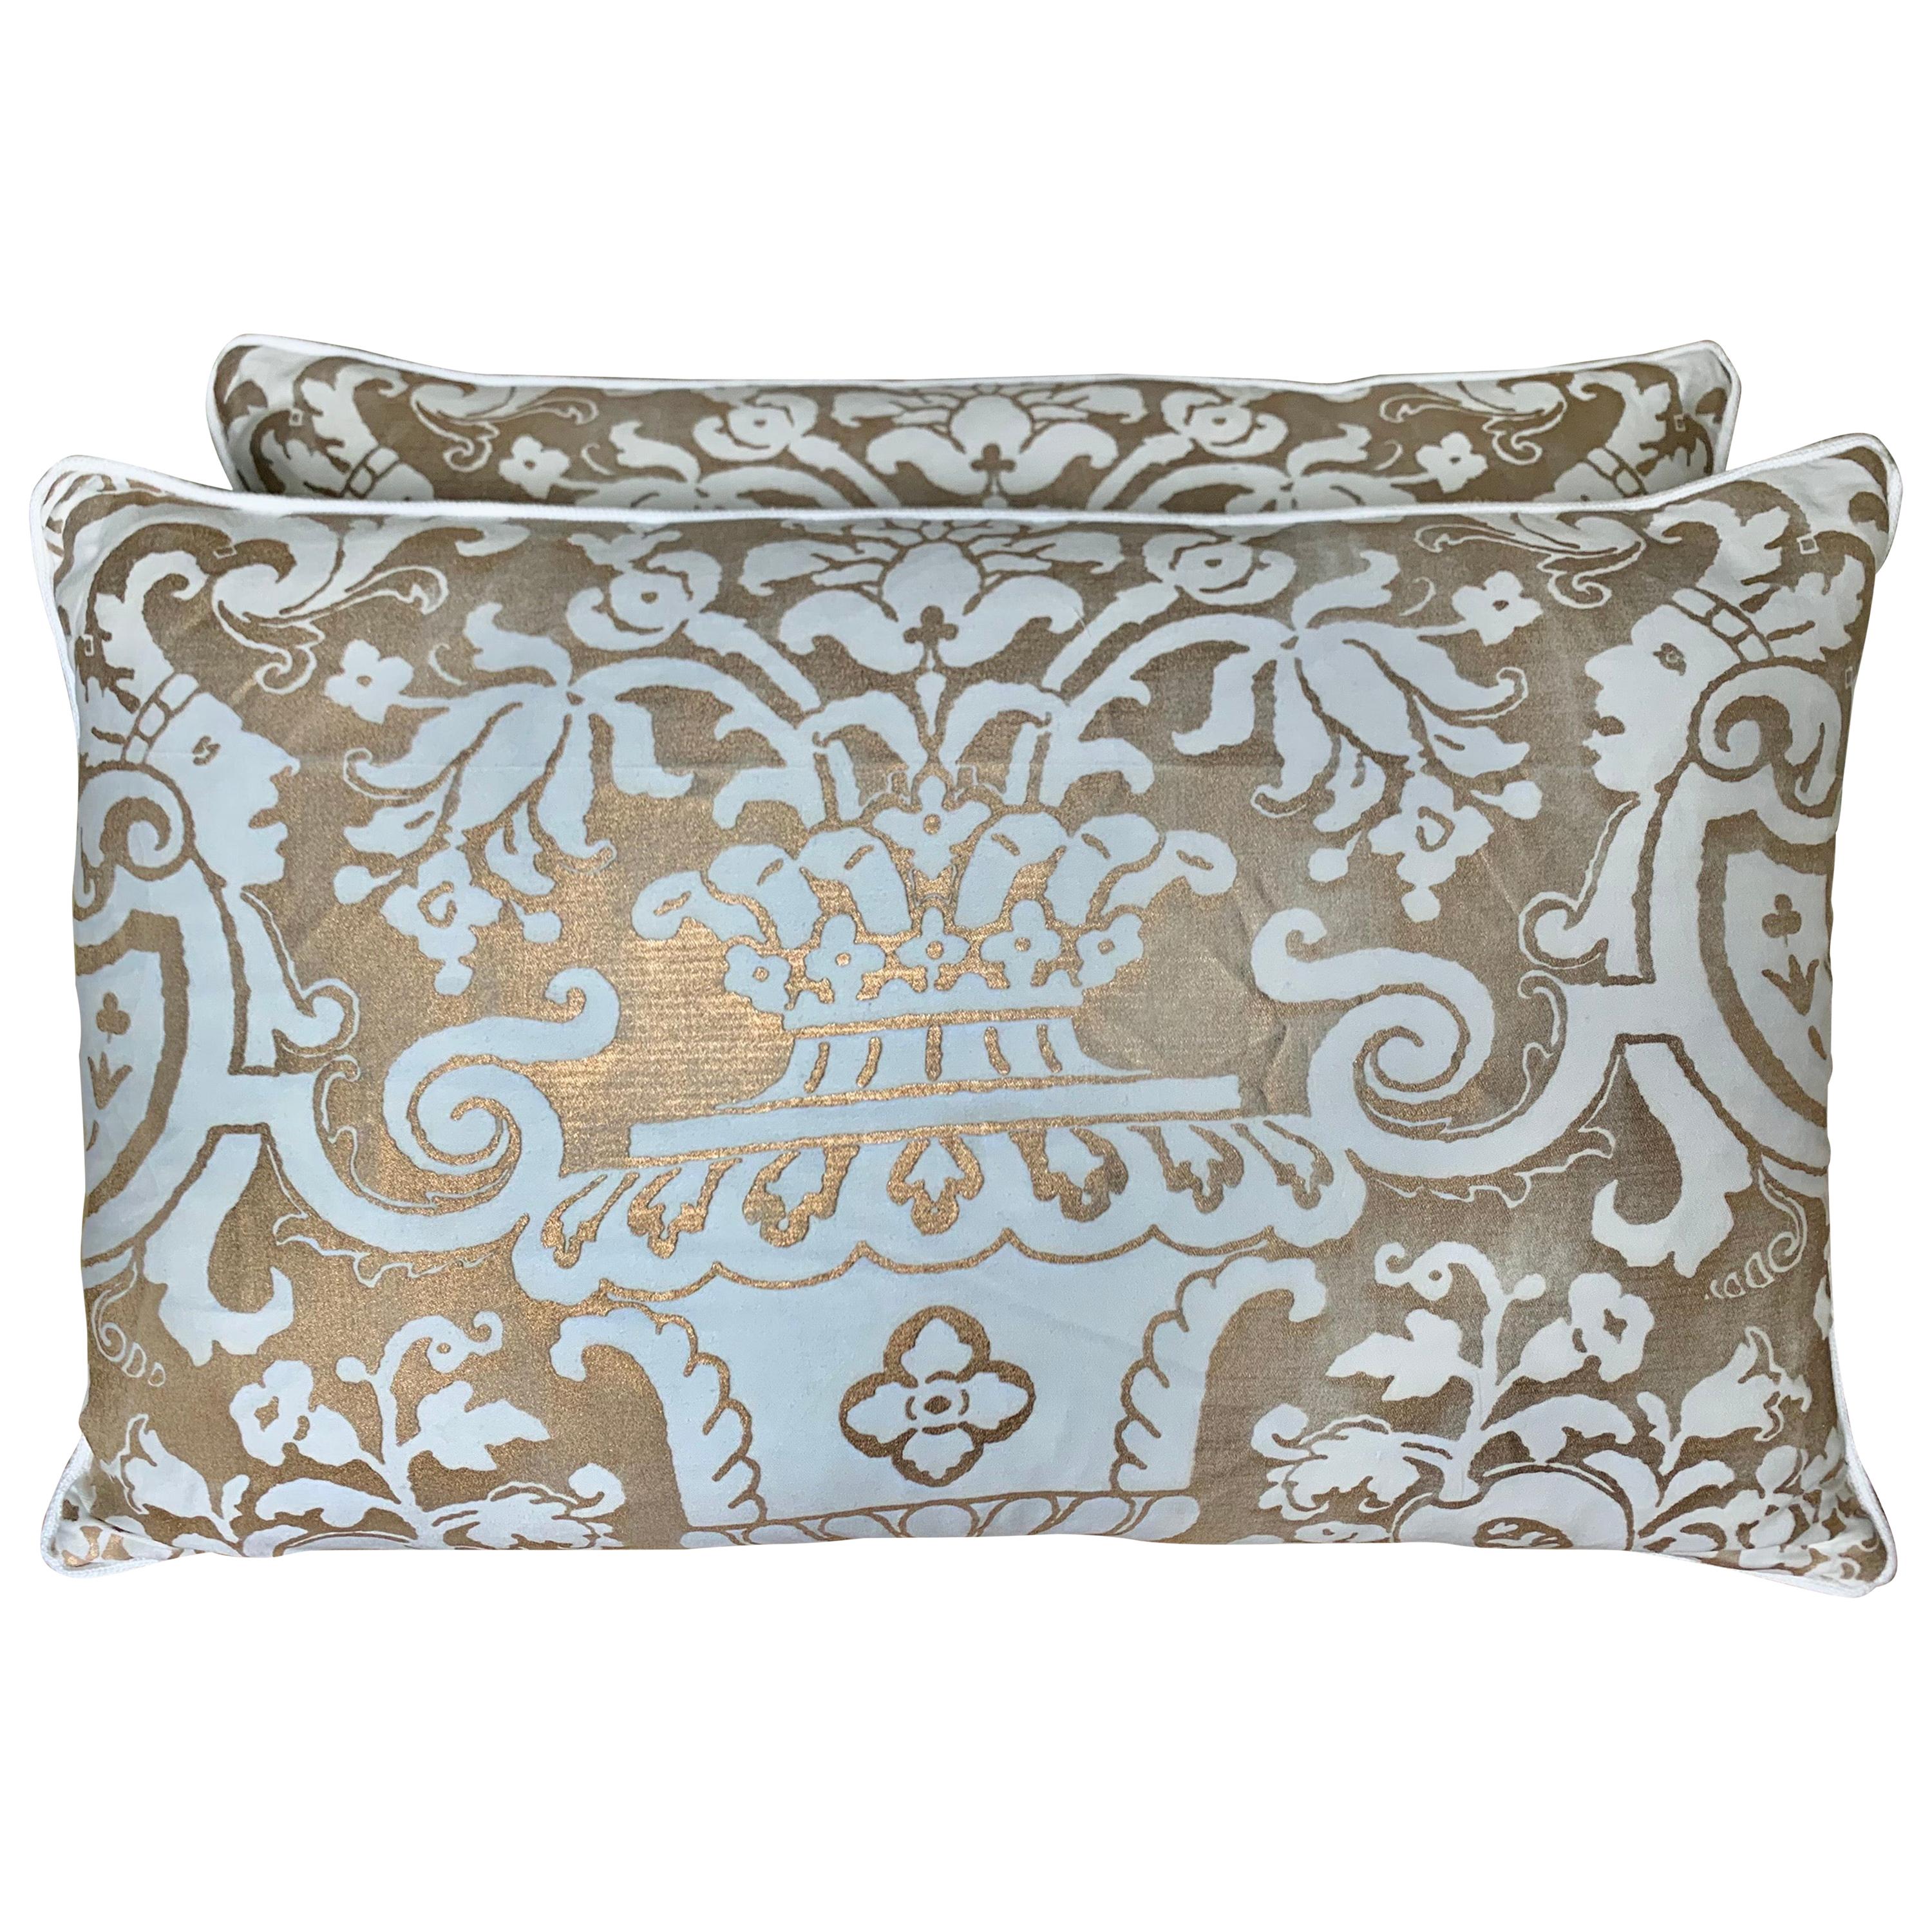 White and Metallic Gold Carnevalet Patterned Fortuny Pillows, Pair